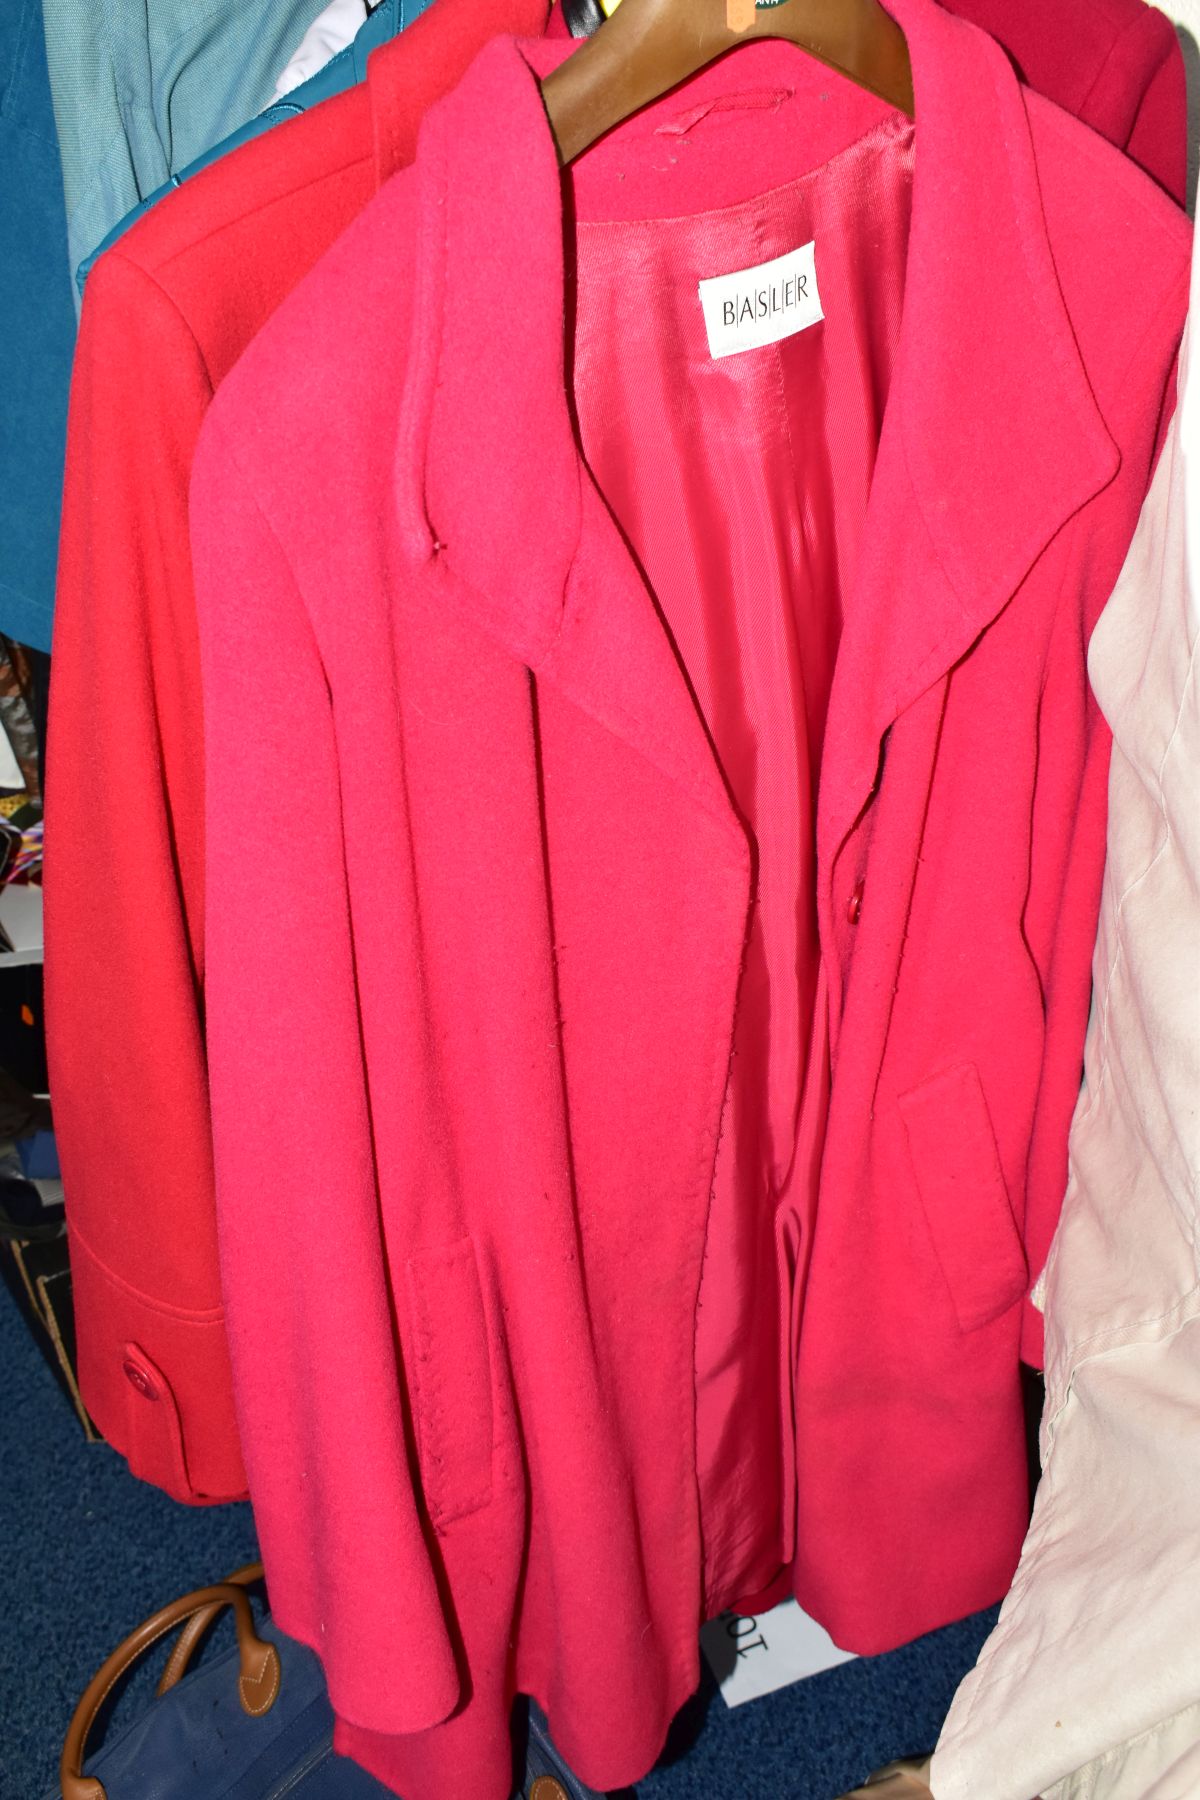 A QUANTITY OF LADIES CLOTHING ETC, to include coats, jackets blouses and jumpers etc brands - Image 10 of 14